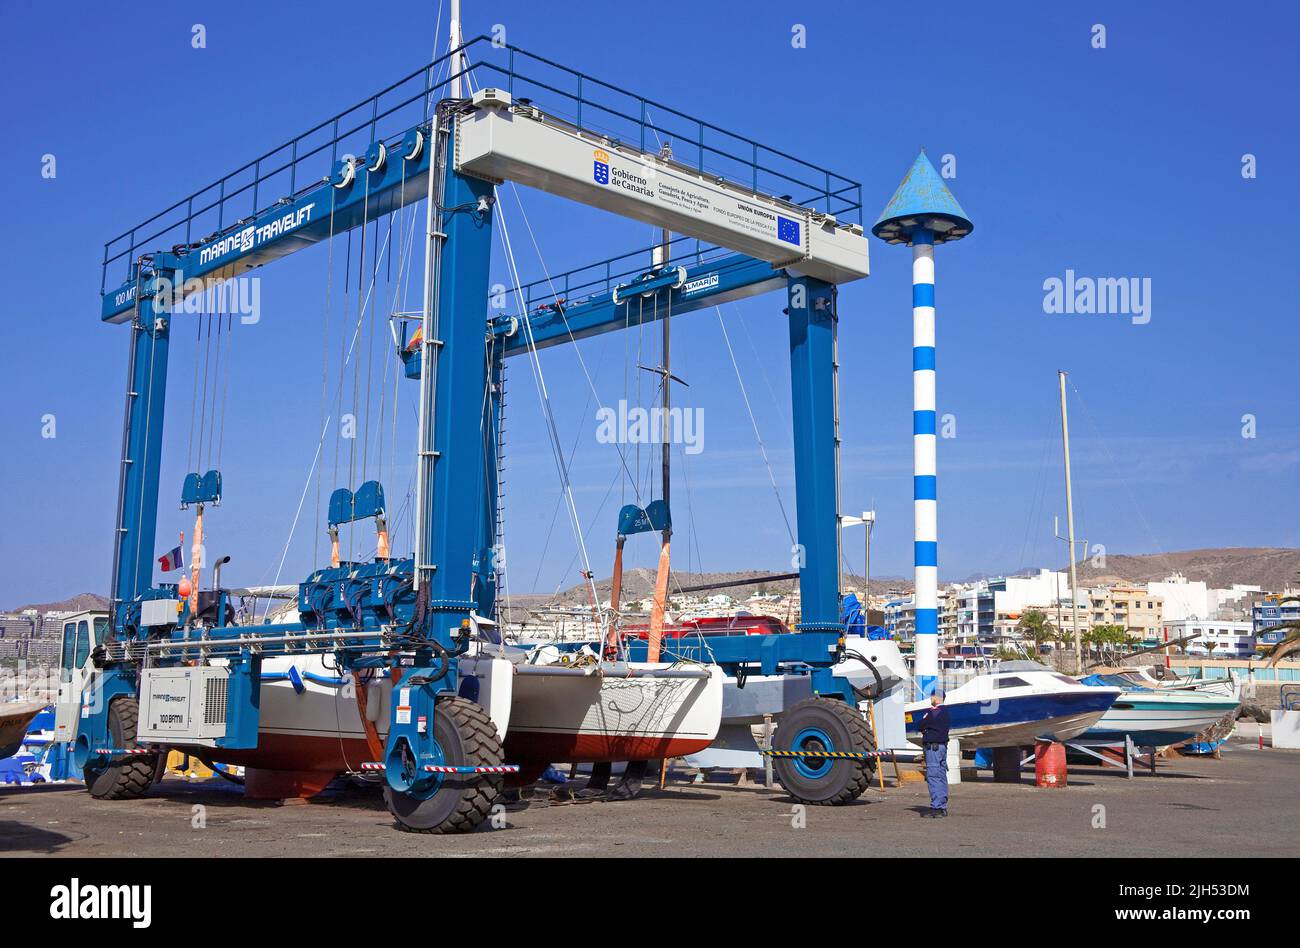 Catamaran in a boat crane, harbour of Arguineguin, Grand Canary, Canary islands, Spain, Europe Stock Photo